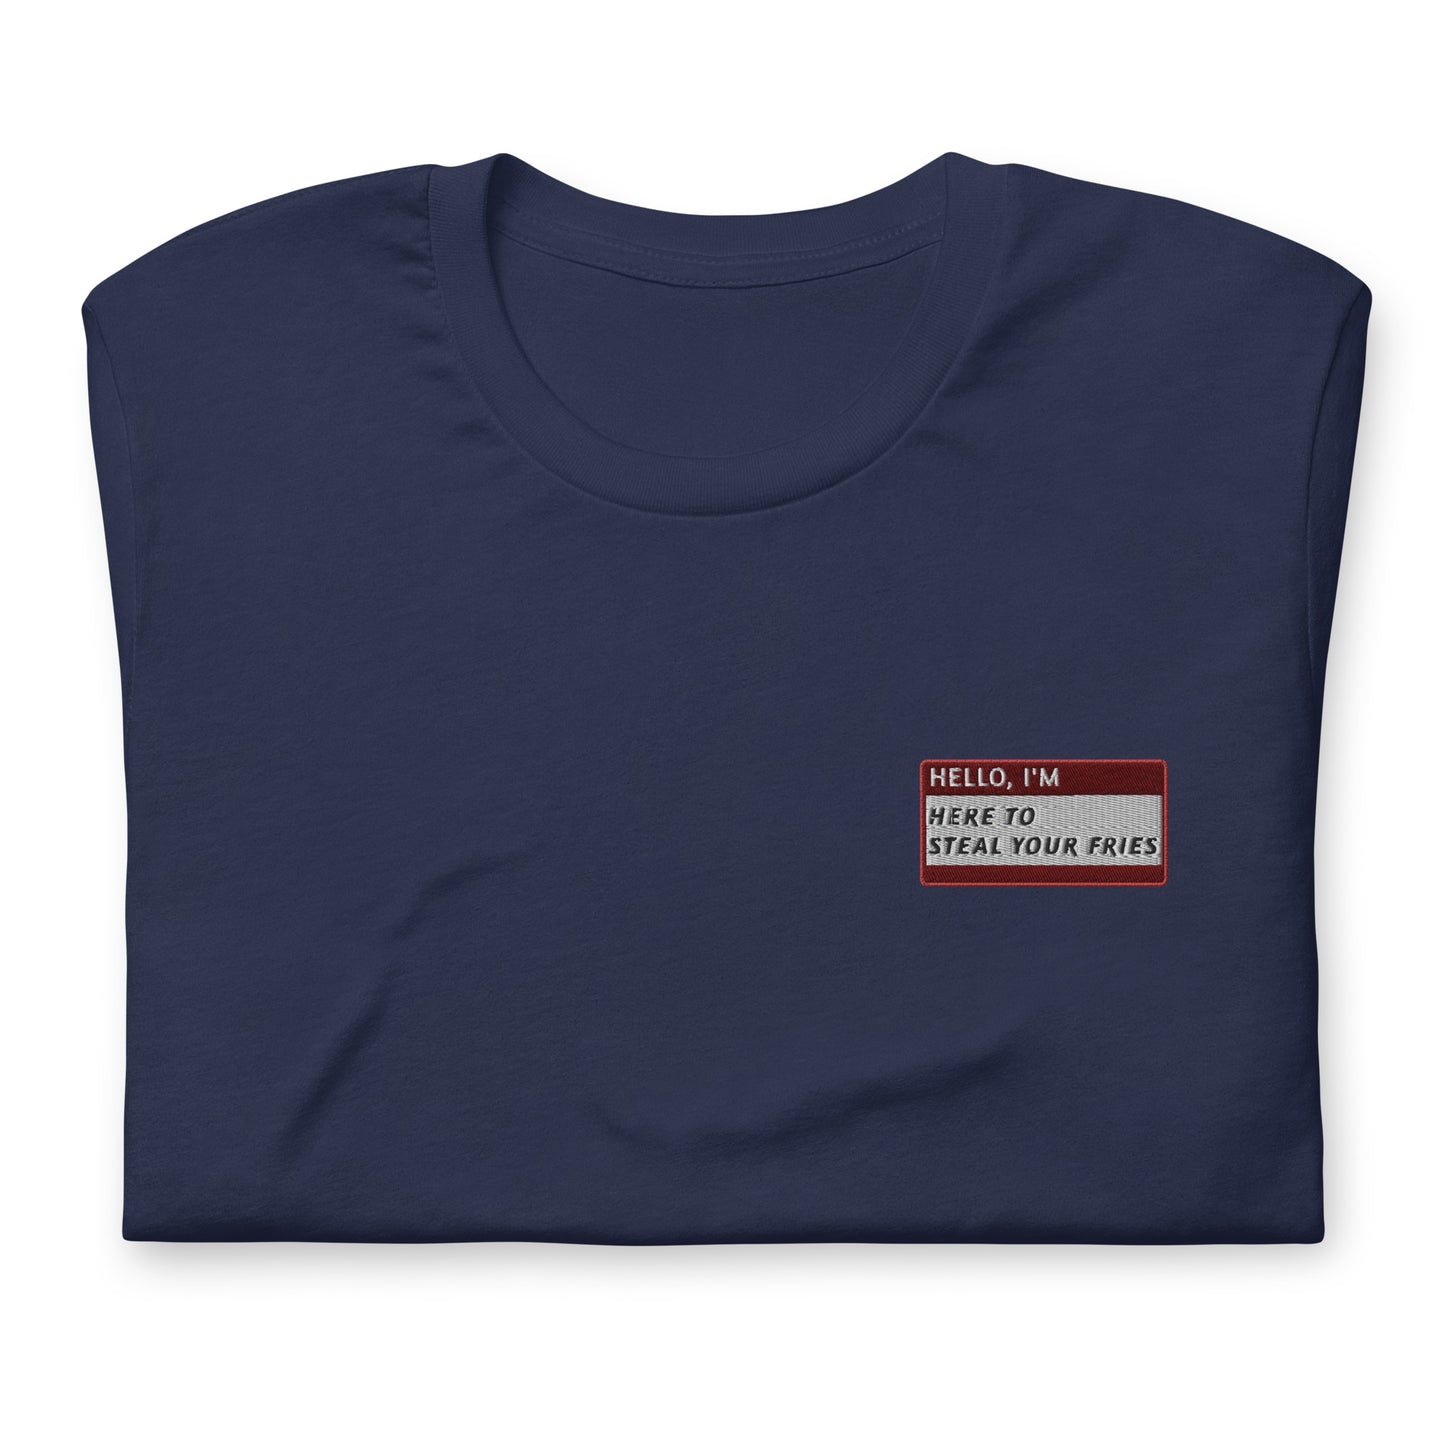 HELLO I'M HERE TO STEAL YOUR FRIES - Name Tag T-Shirt